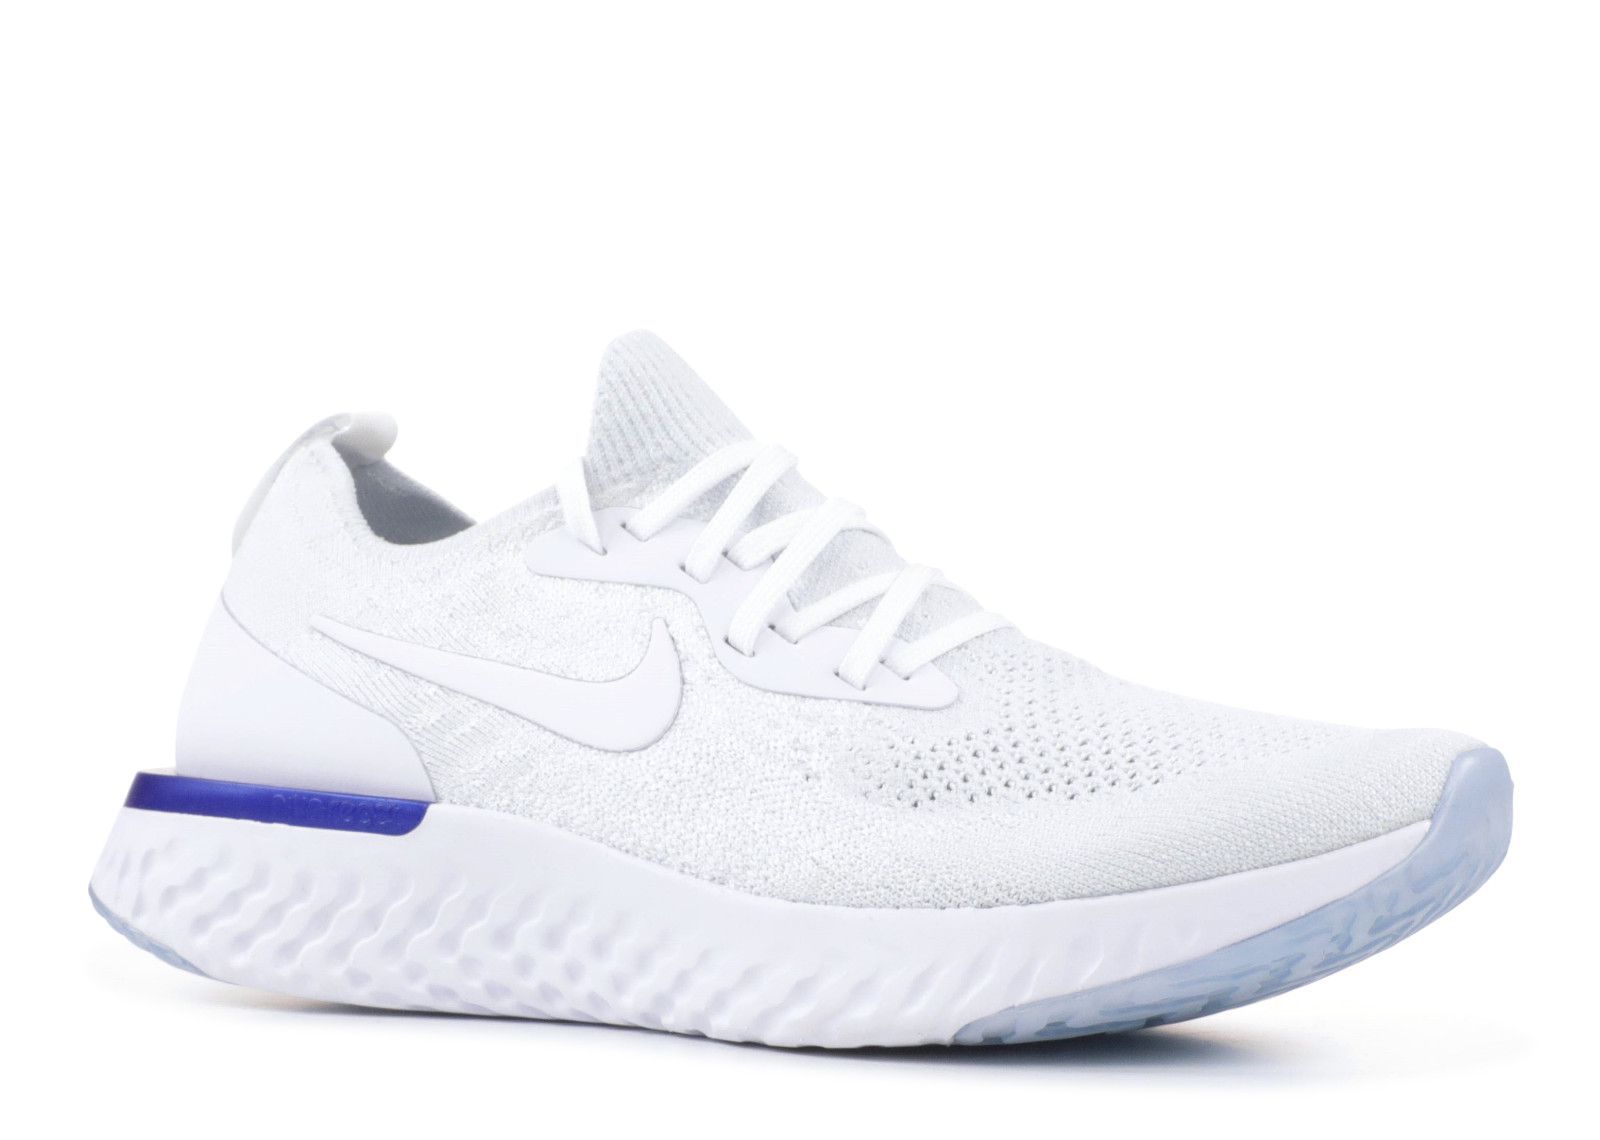 nike epic react shoes price in india